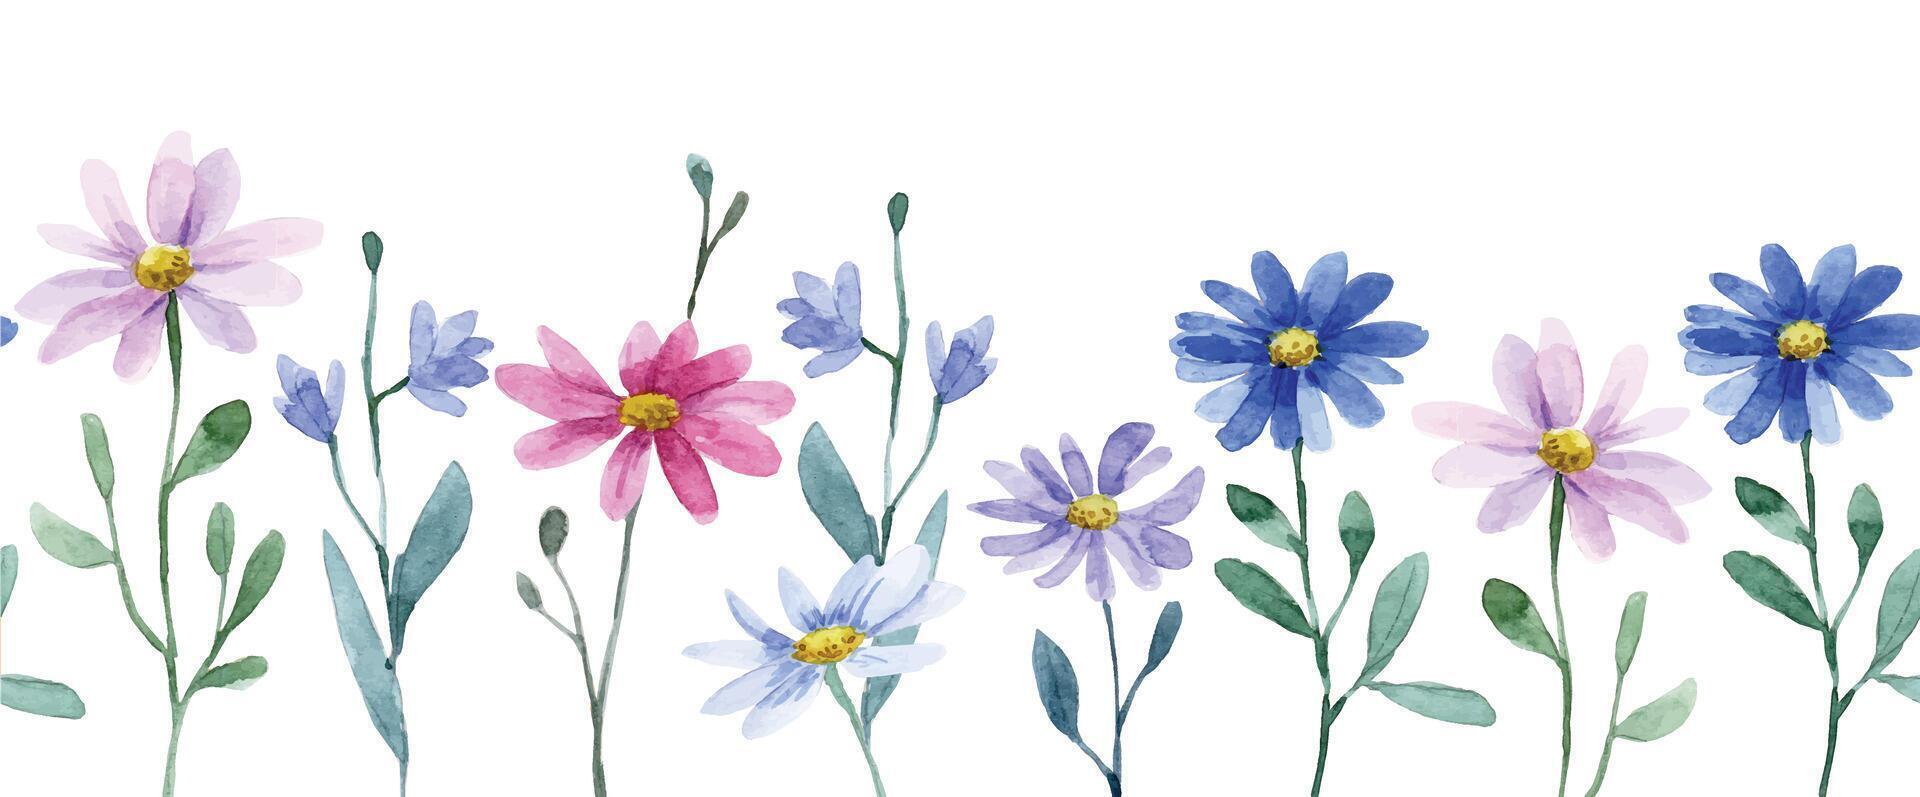 seamless border with wildflowers daisy. watercolor drawing. vector